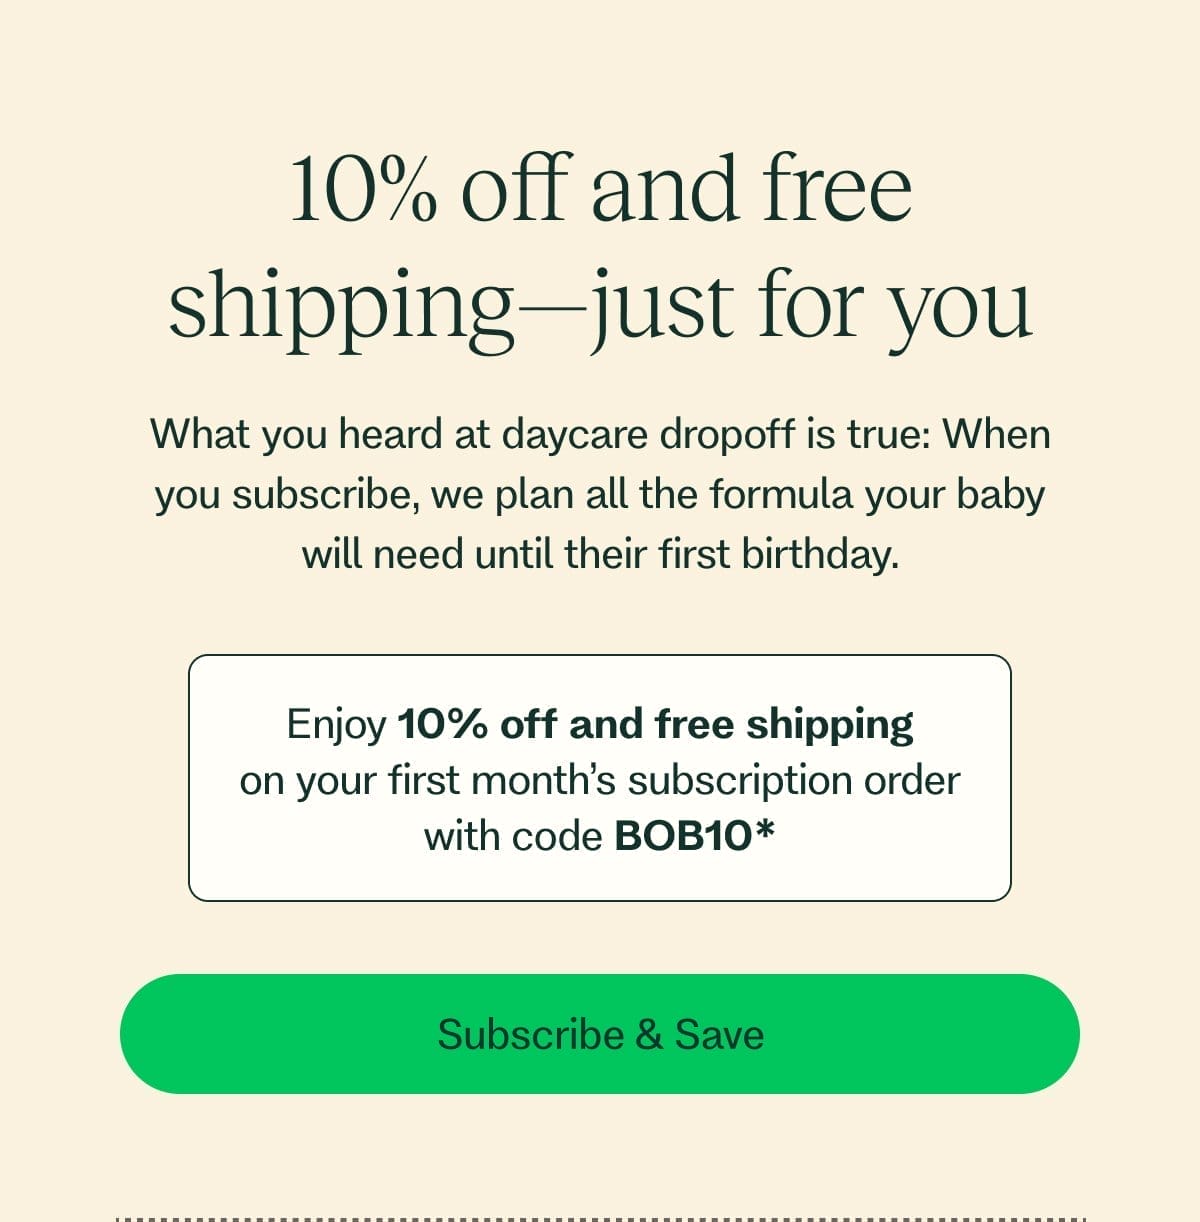 10% off and free shipping—just for you What you heard at daycare dropoff is true: When you subscribe, we plan all the formula your baby will need until their first birthday. Enjoy 10% off and free shipping on your first month’s subscription order with code BOB10* Subscribe & Save